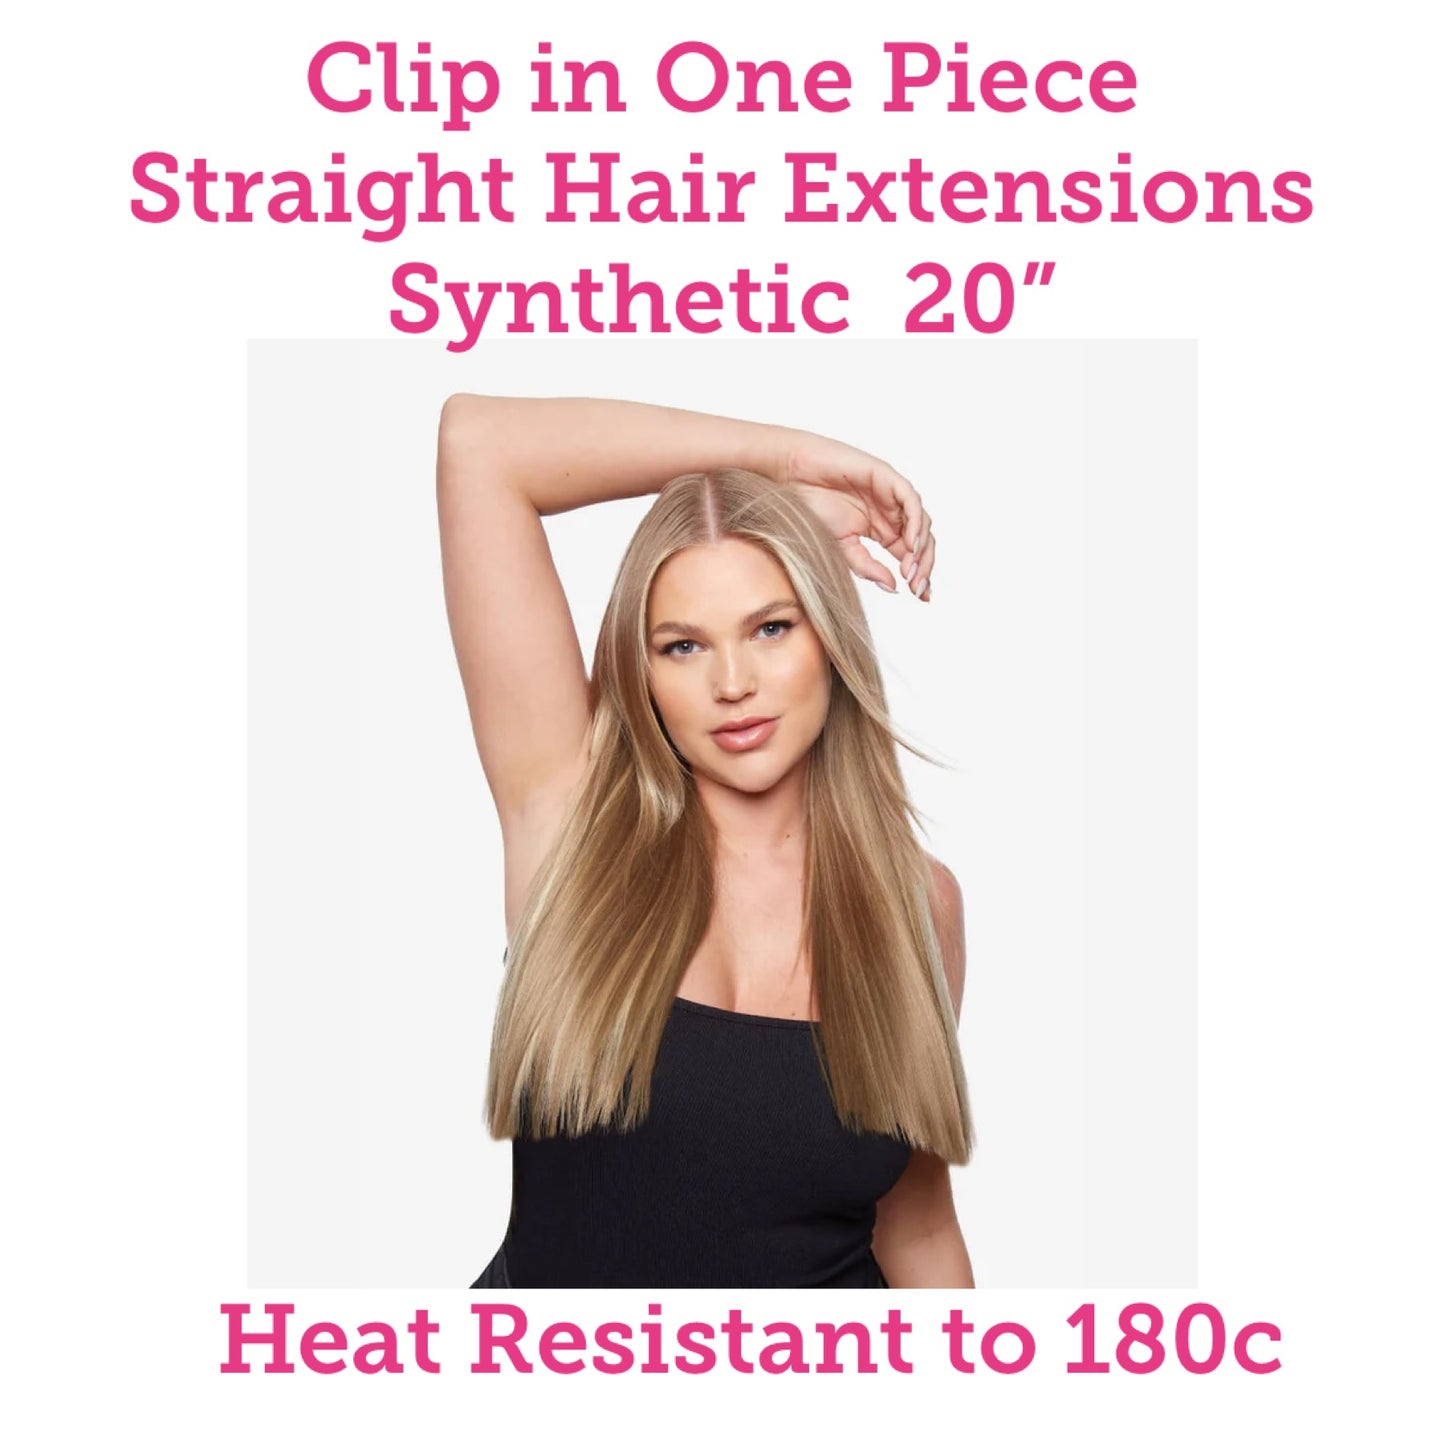 Clip in Straight One Piece Hair Extensions Synthetic 20”